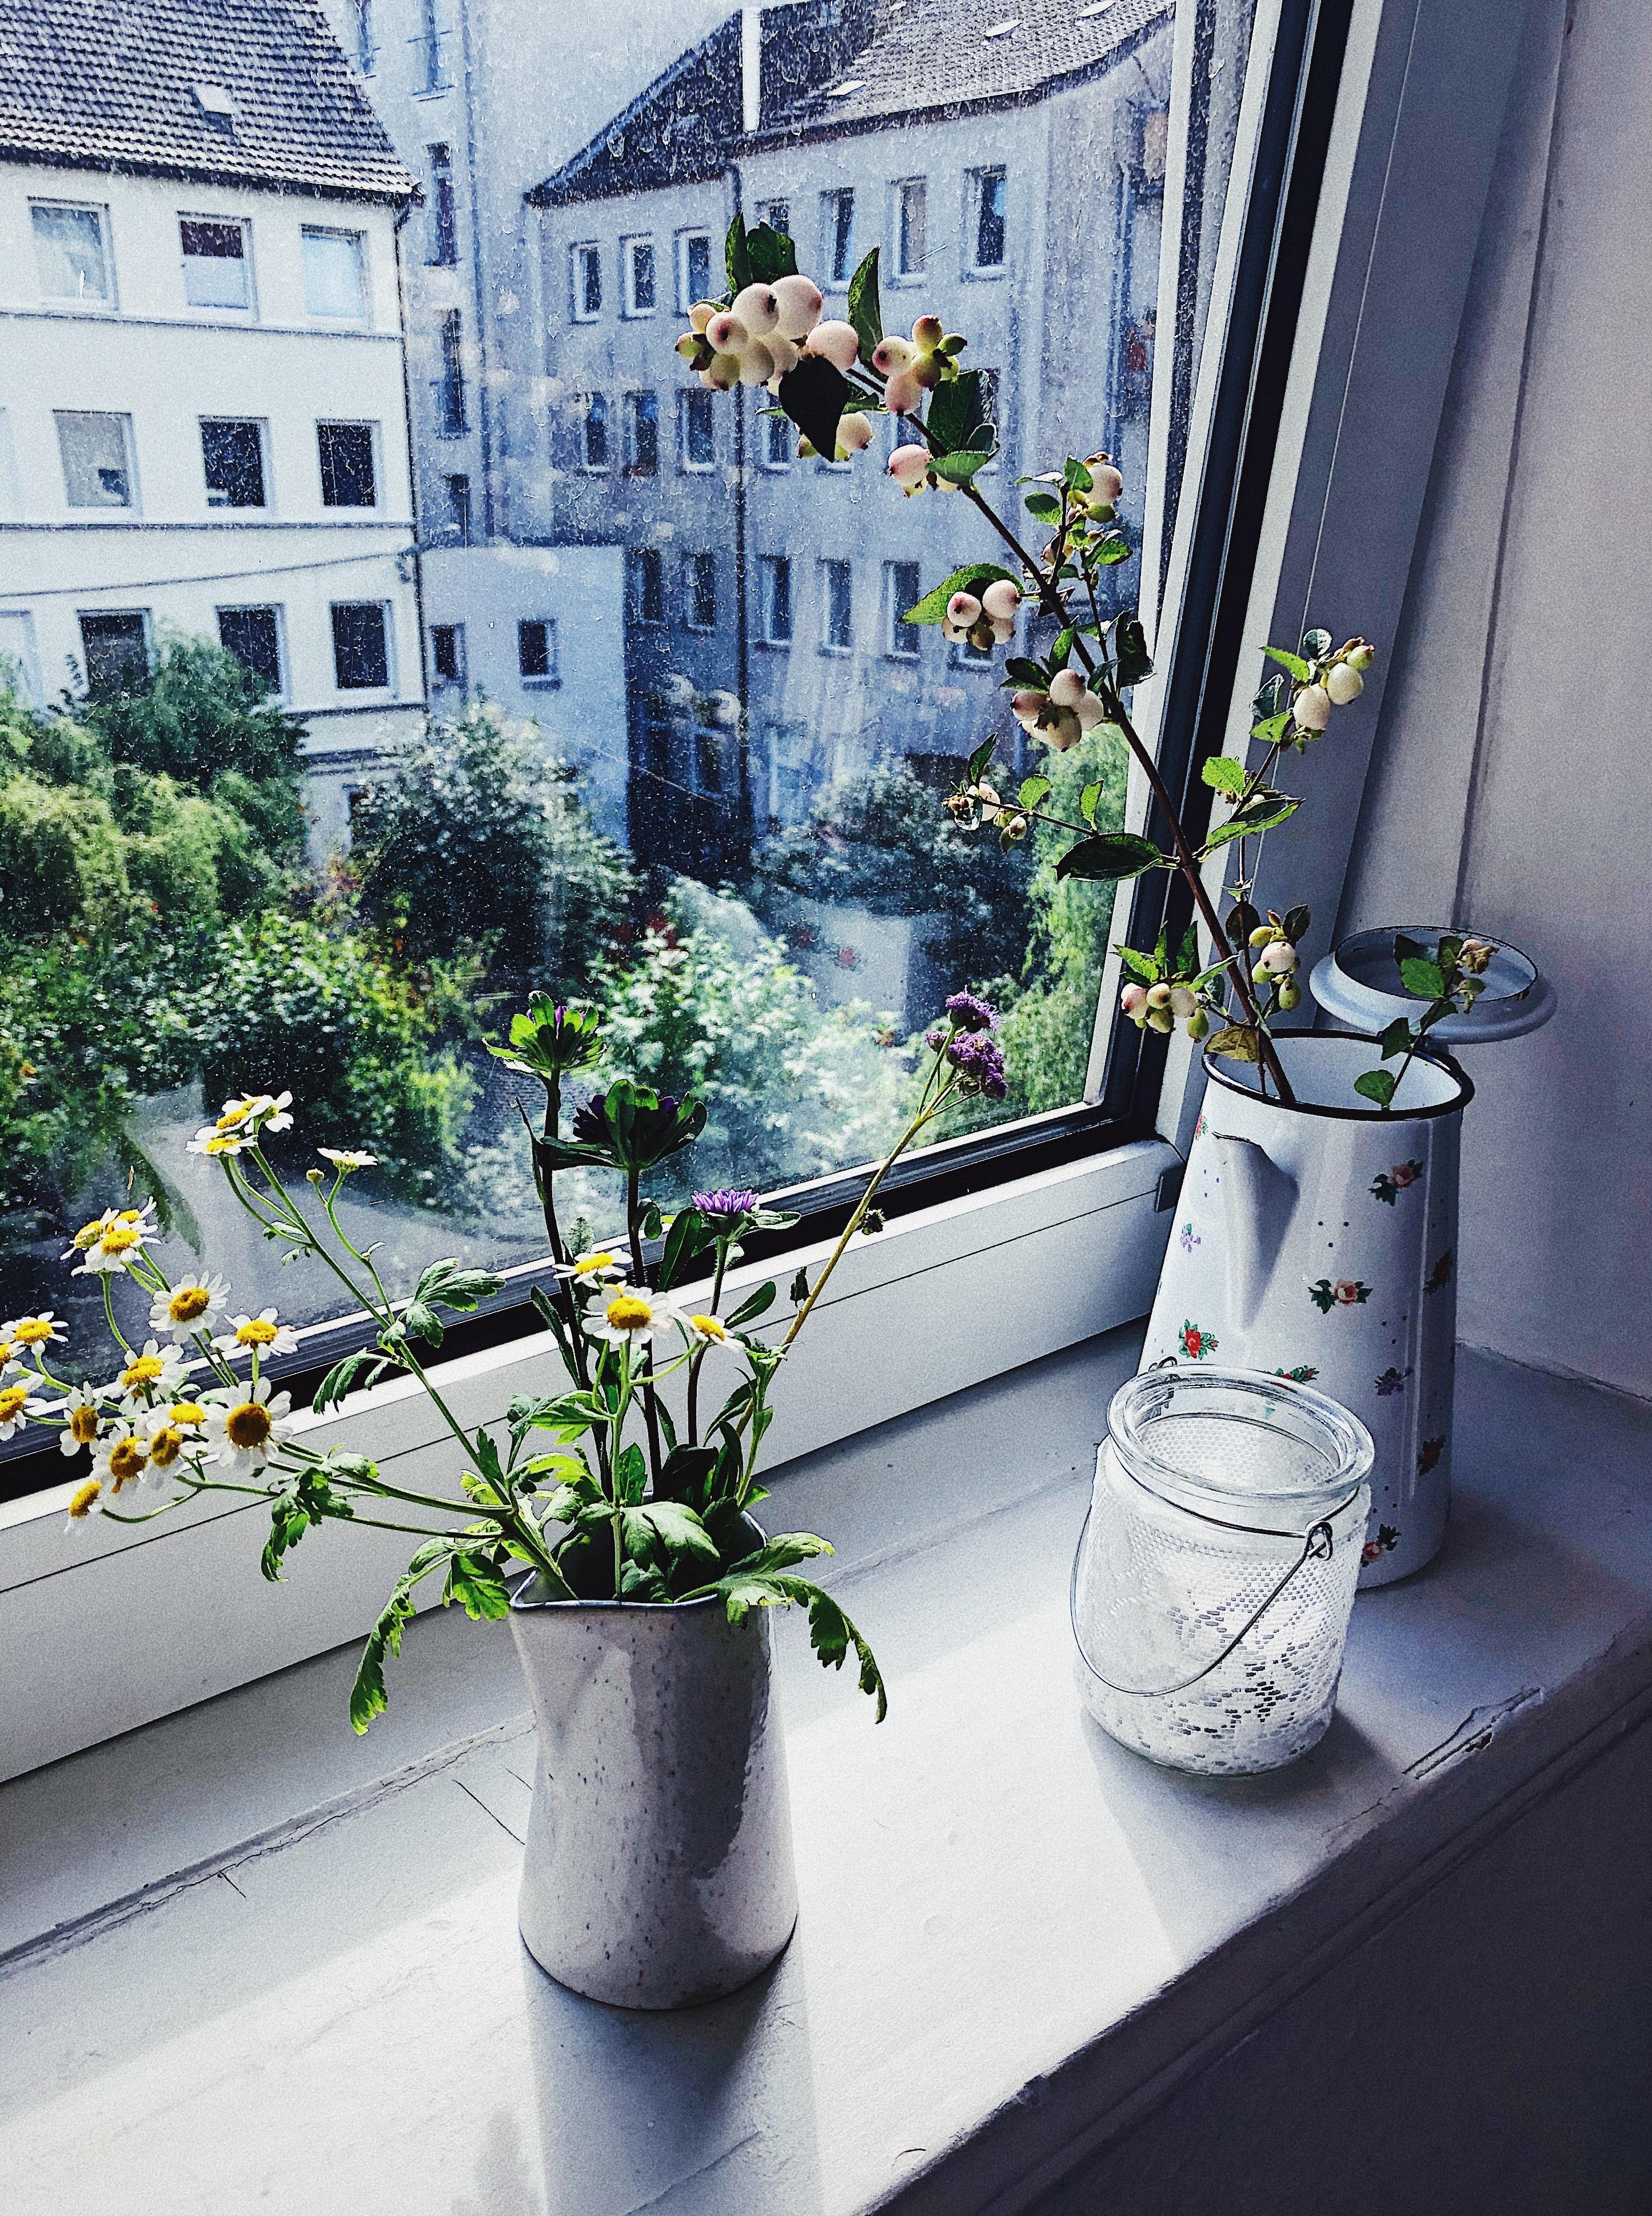 ROOM WITH A VIEW
#bedroomview #flowers #skandi #scandinavianliving #itsthelittlethings